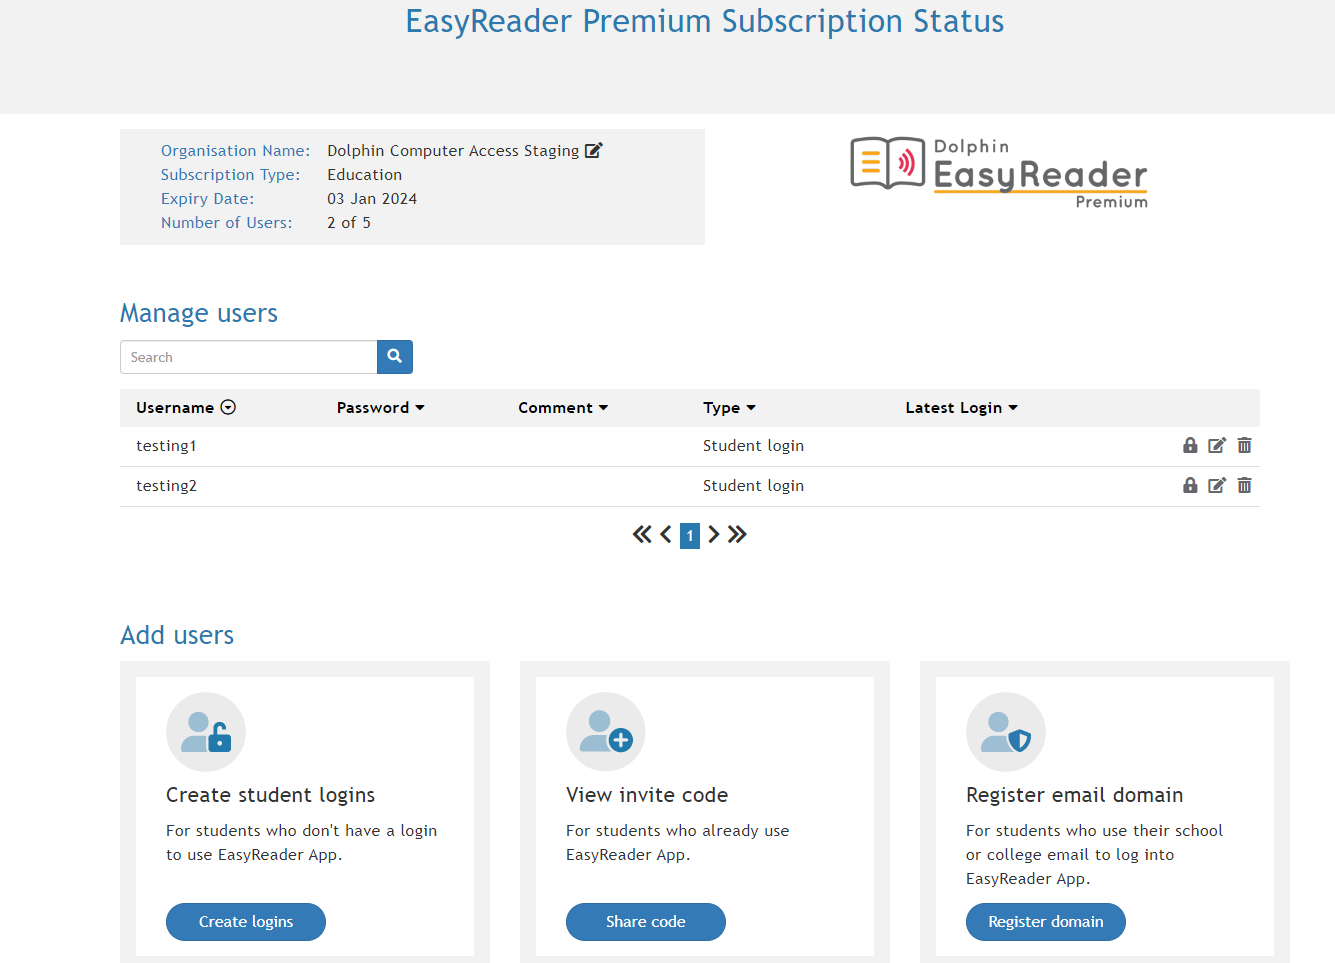 Screenshot of a sample Manage Users. Under the heading Mangae Users there is a list of user email addresses. Each user email has a trashcan symbol to the right.